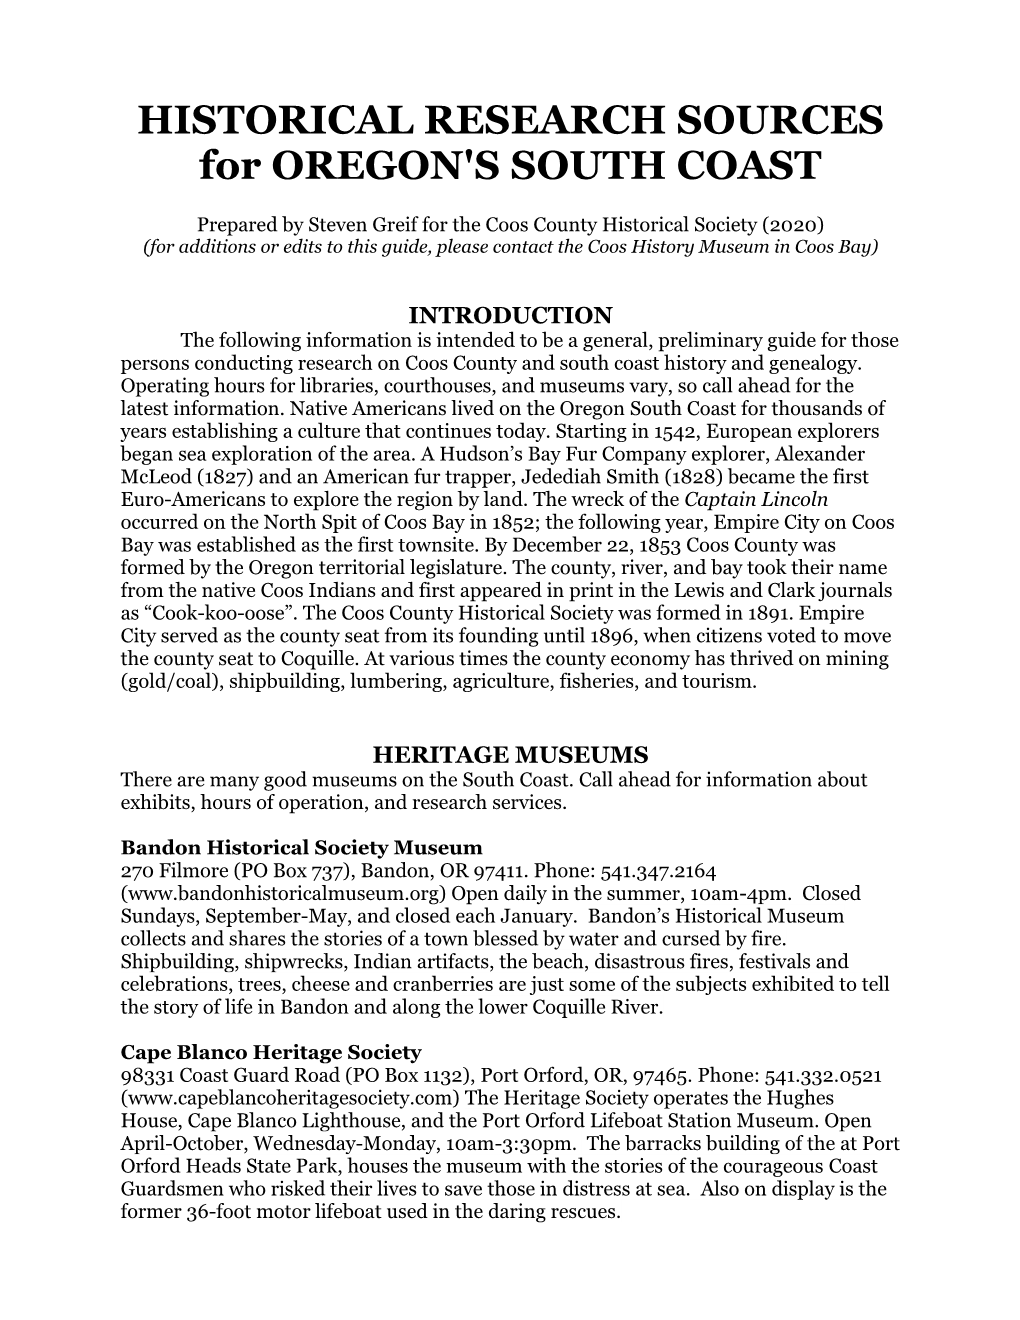 HISTORICAL RESEARCH SOURCES for OREGON's SOUTH COAST